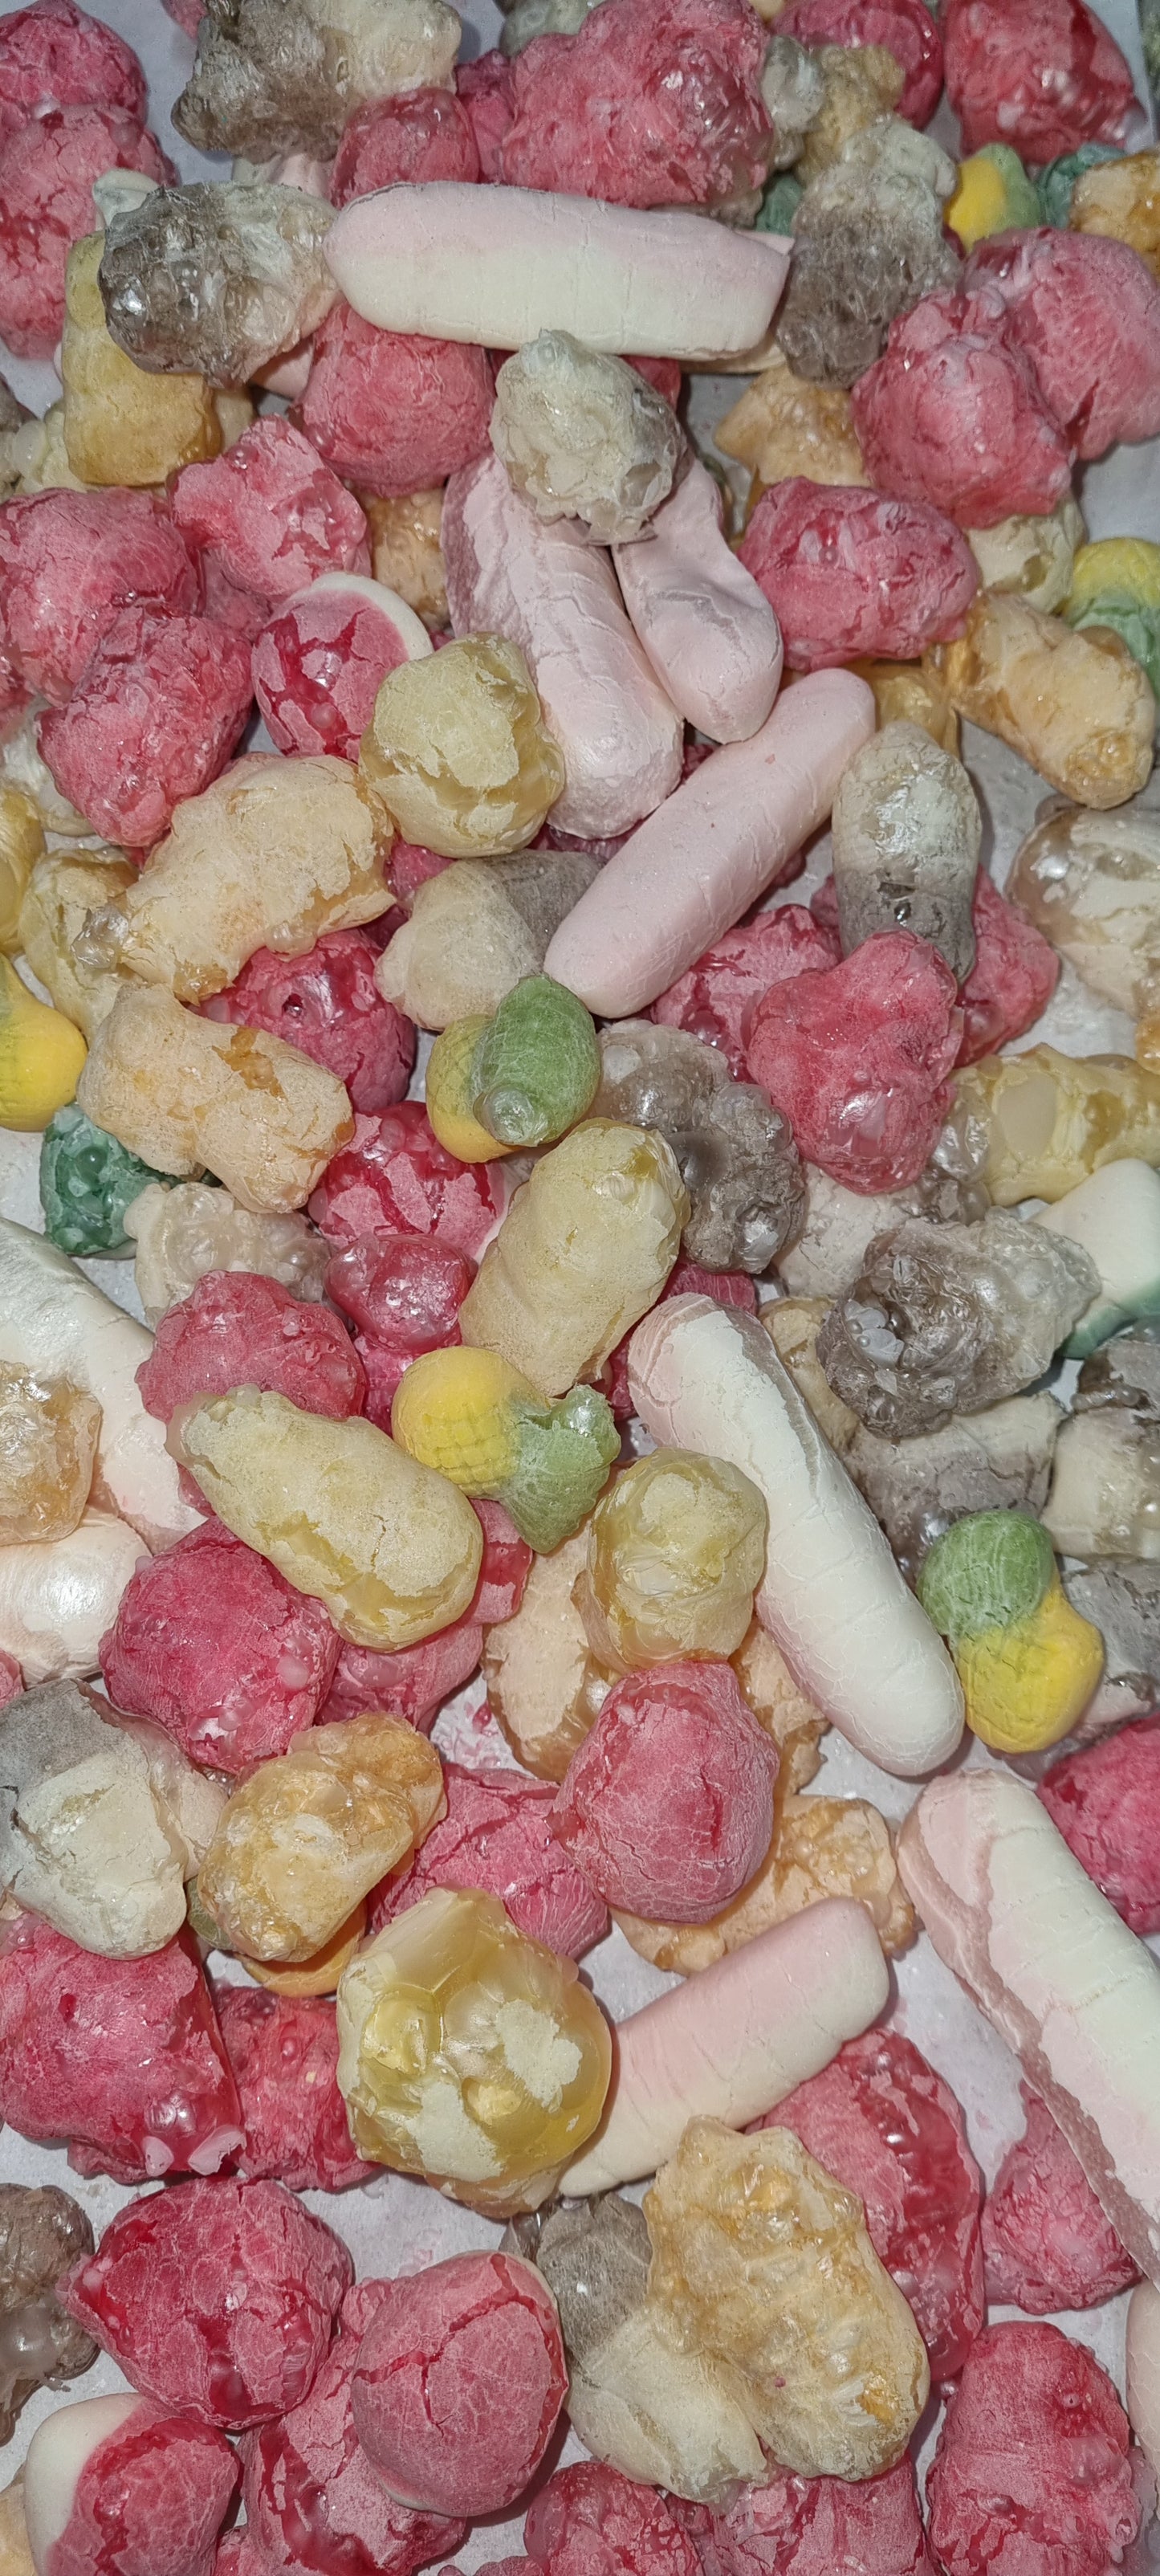 FREEZE DRIED Party Mix